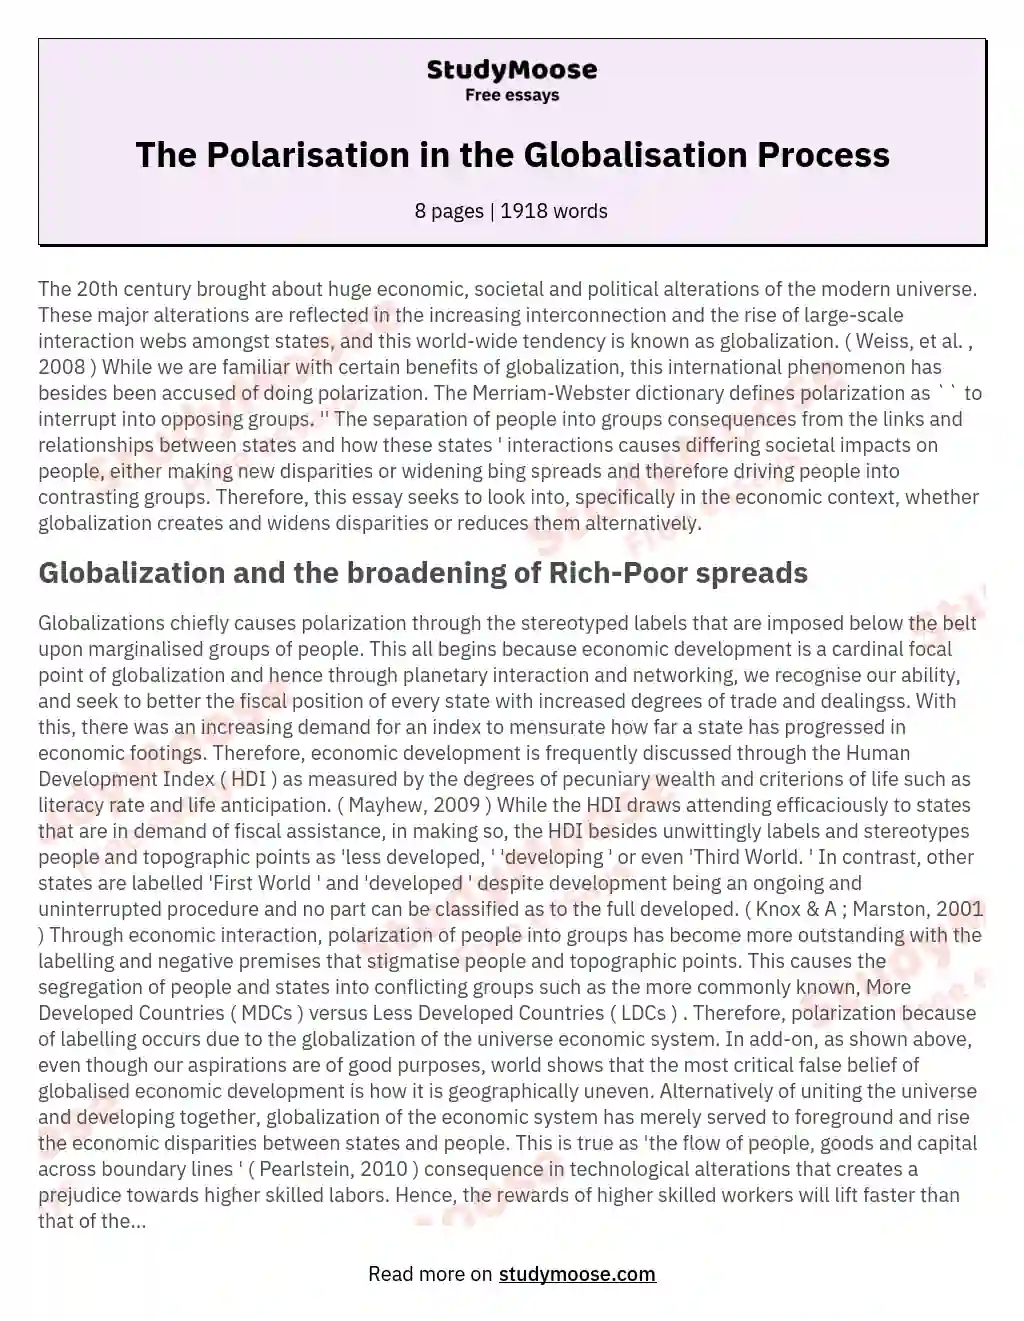 The Polarisation in the Globalisation Process essay